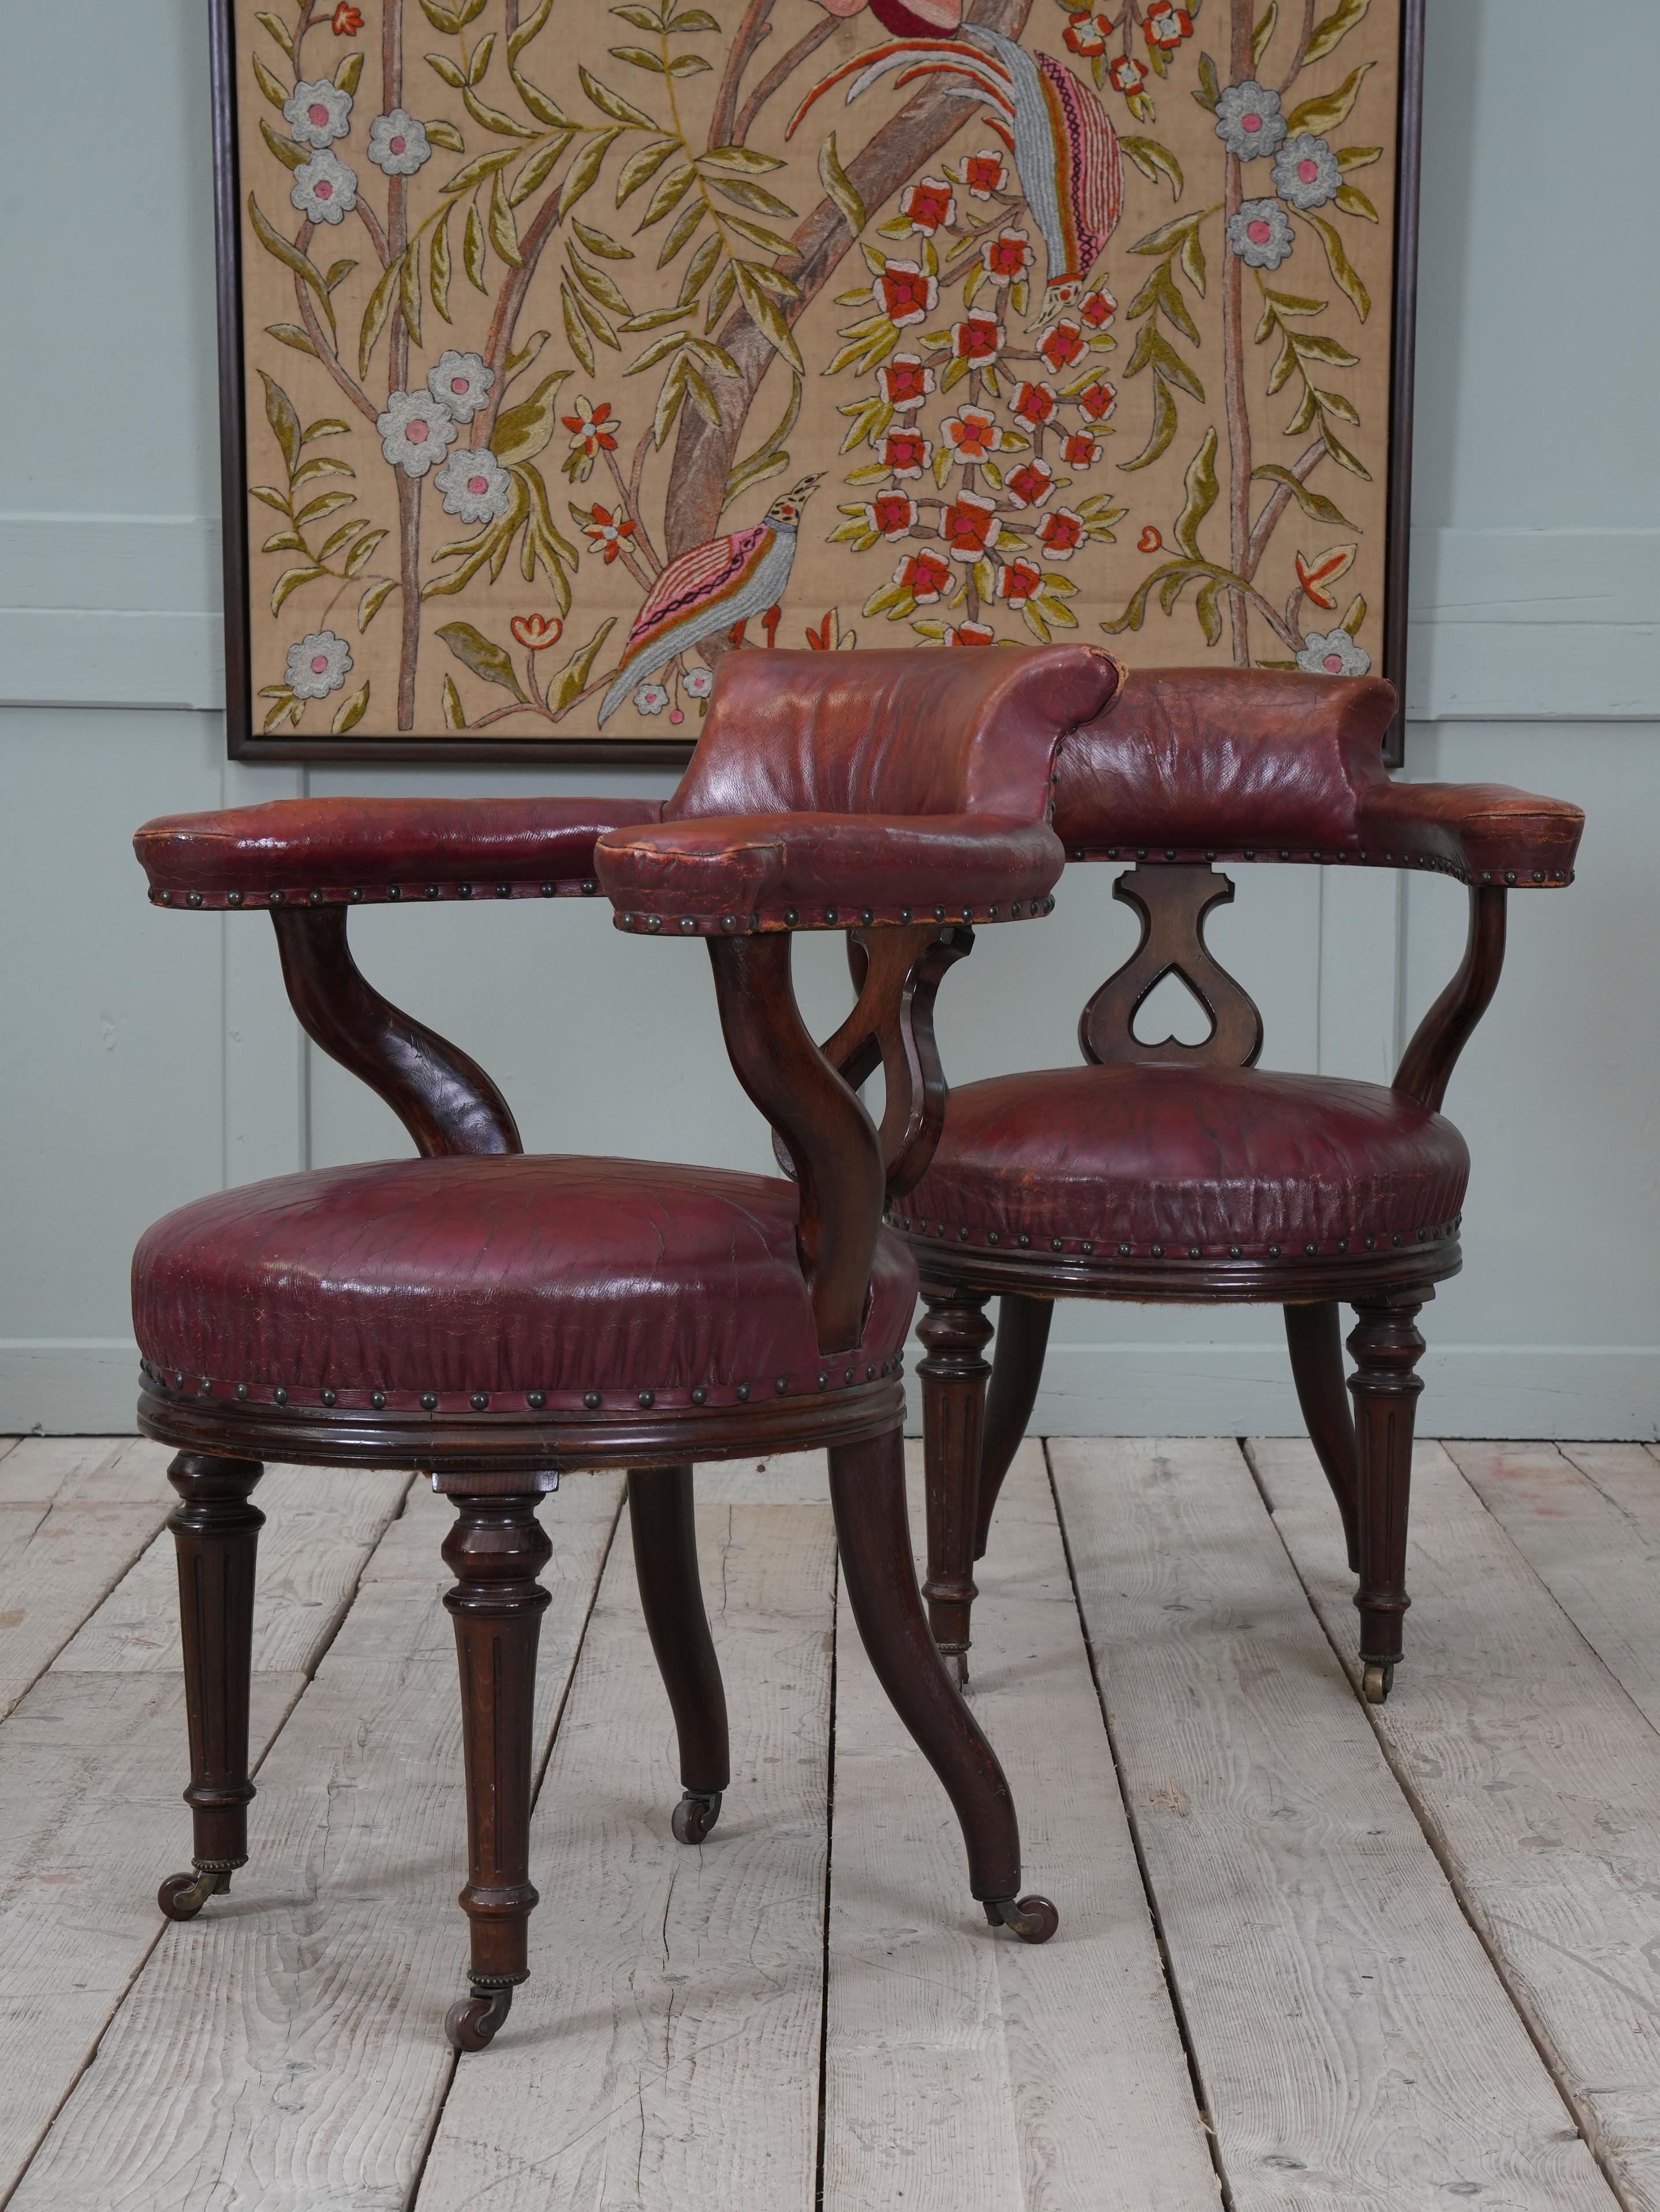 A run of oak and Moroccan leather library chairs.

Raised on glazed pot caster on turned tapering oak legs, Moroccan leather seat, back support and armrests, inverted heart motif back splat.

Priced individually, six available.